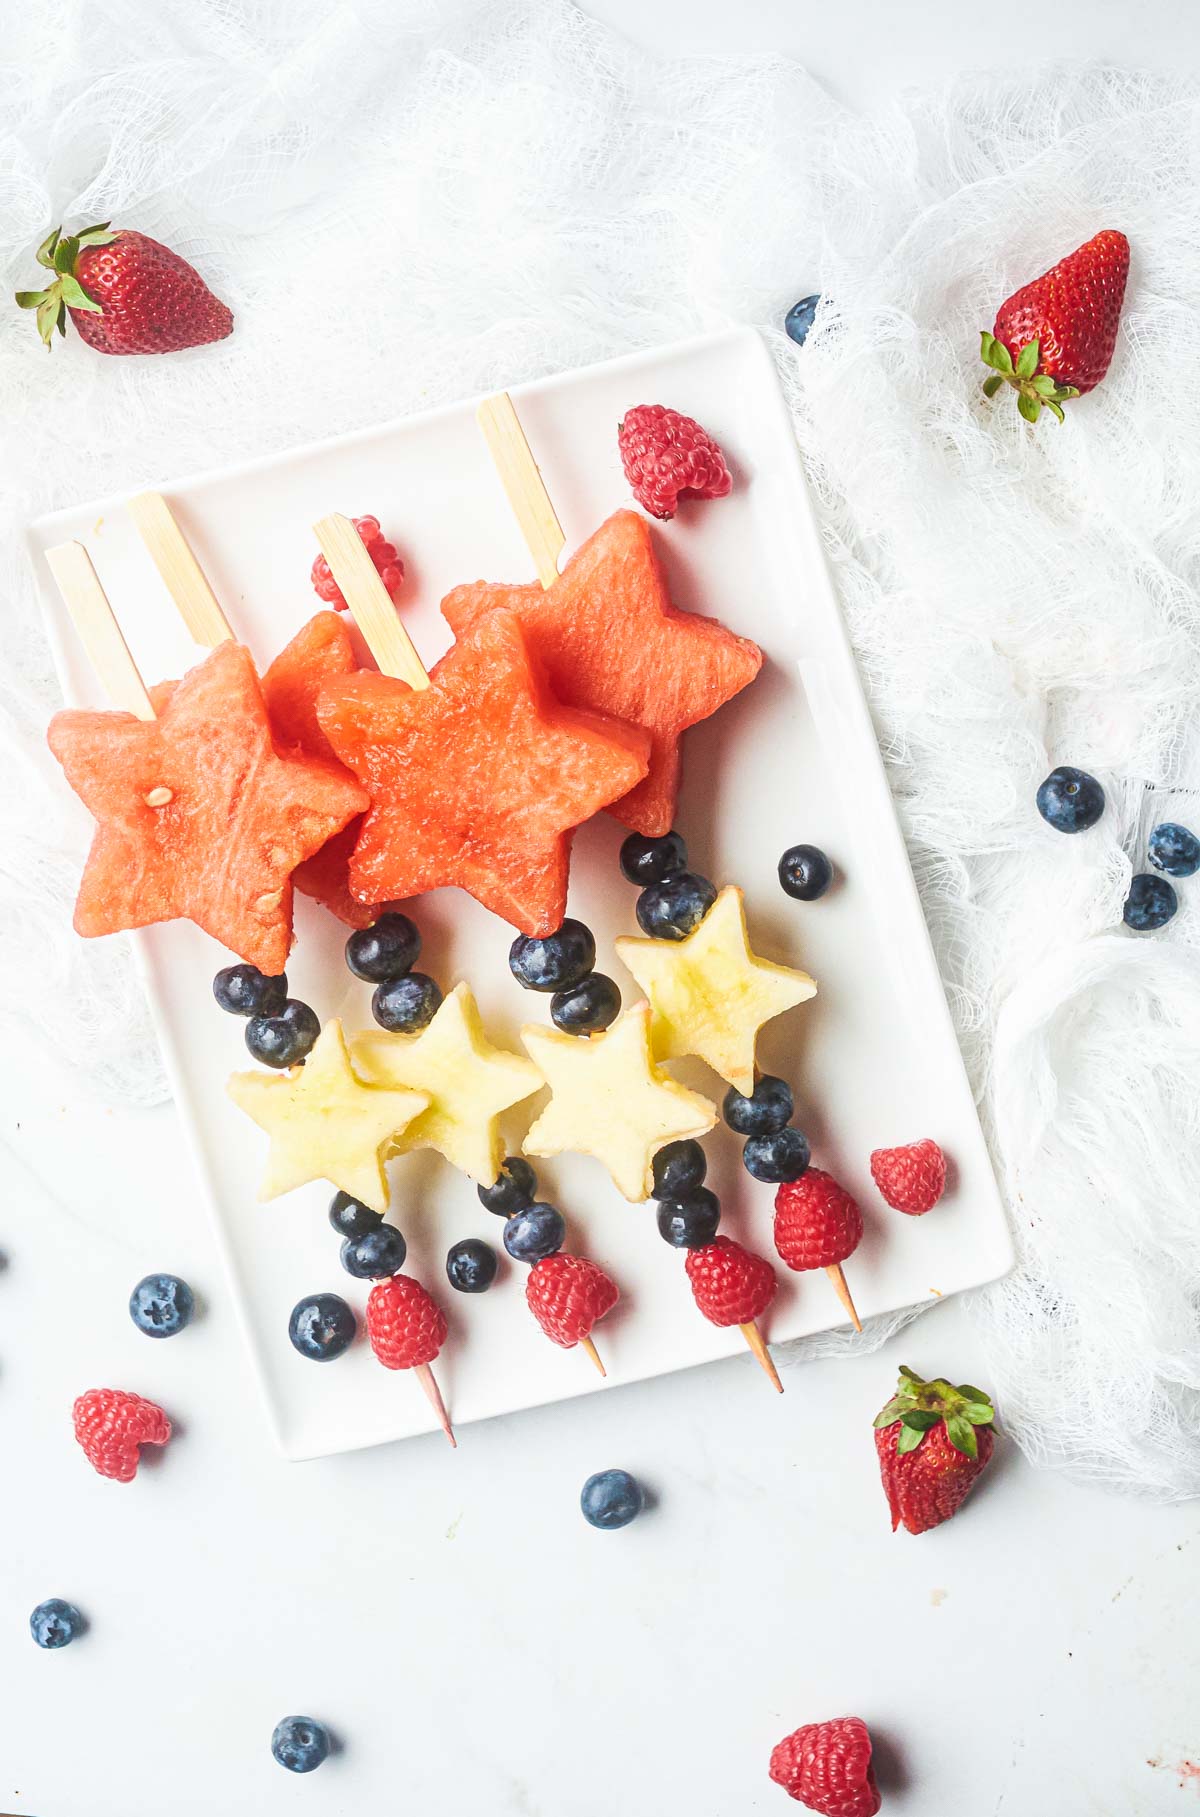 patriotic fruit skewers on. aplte with colorful berries dotted around